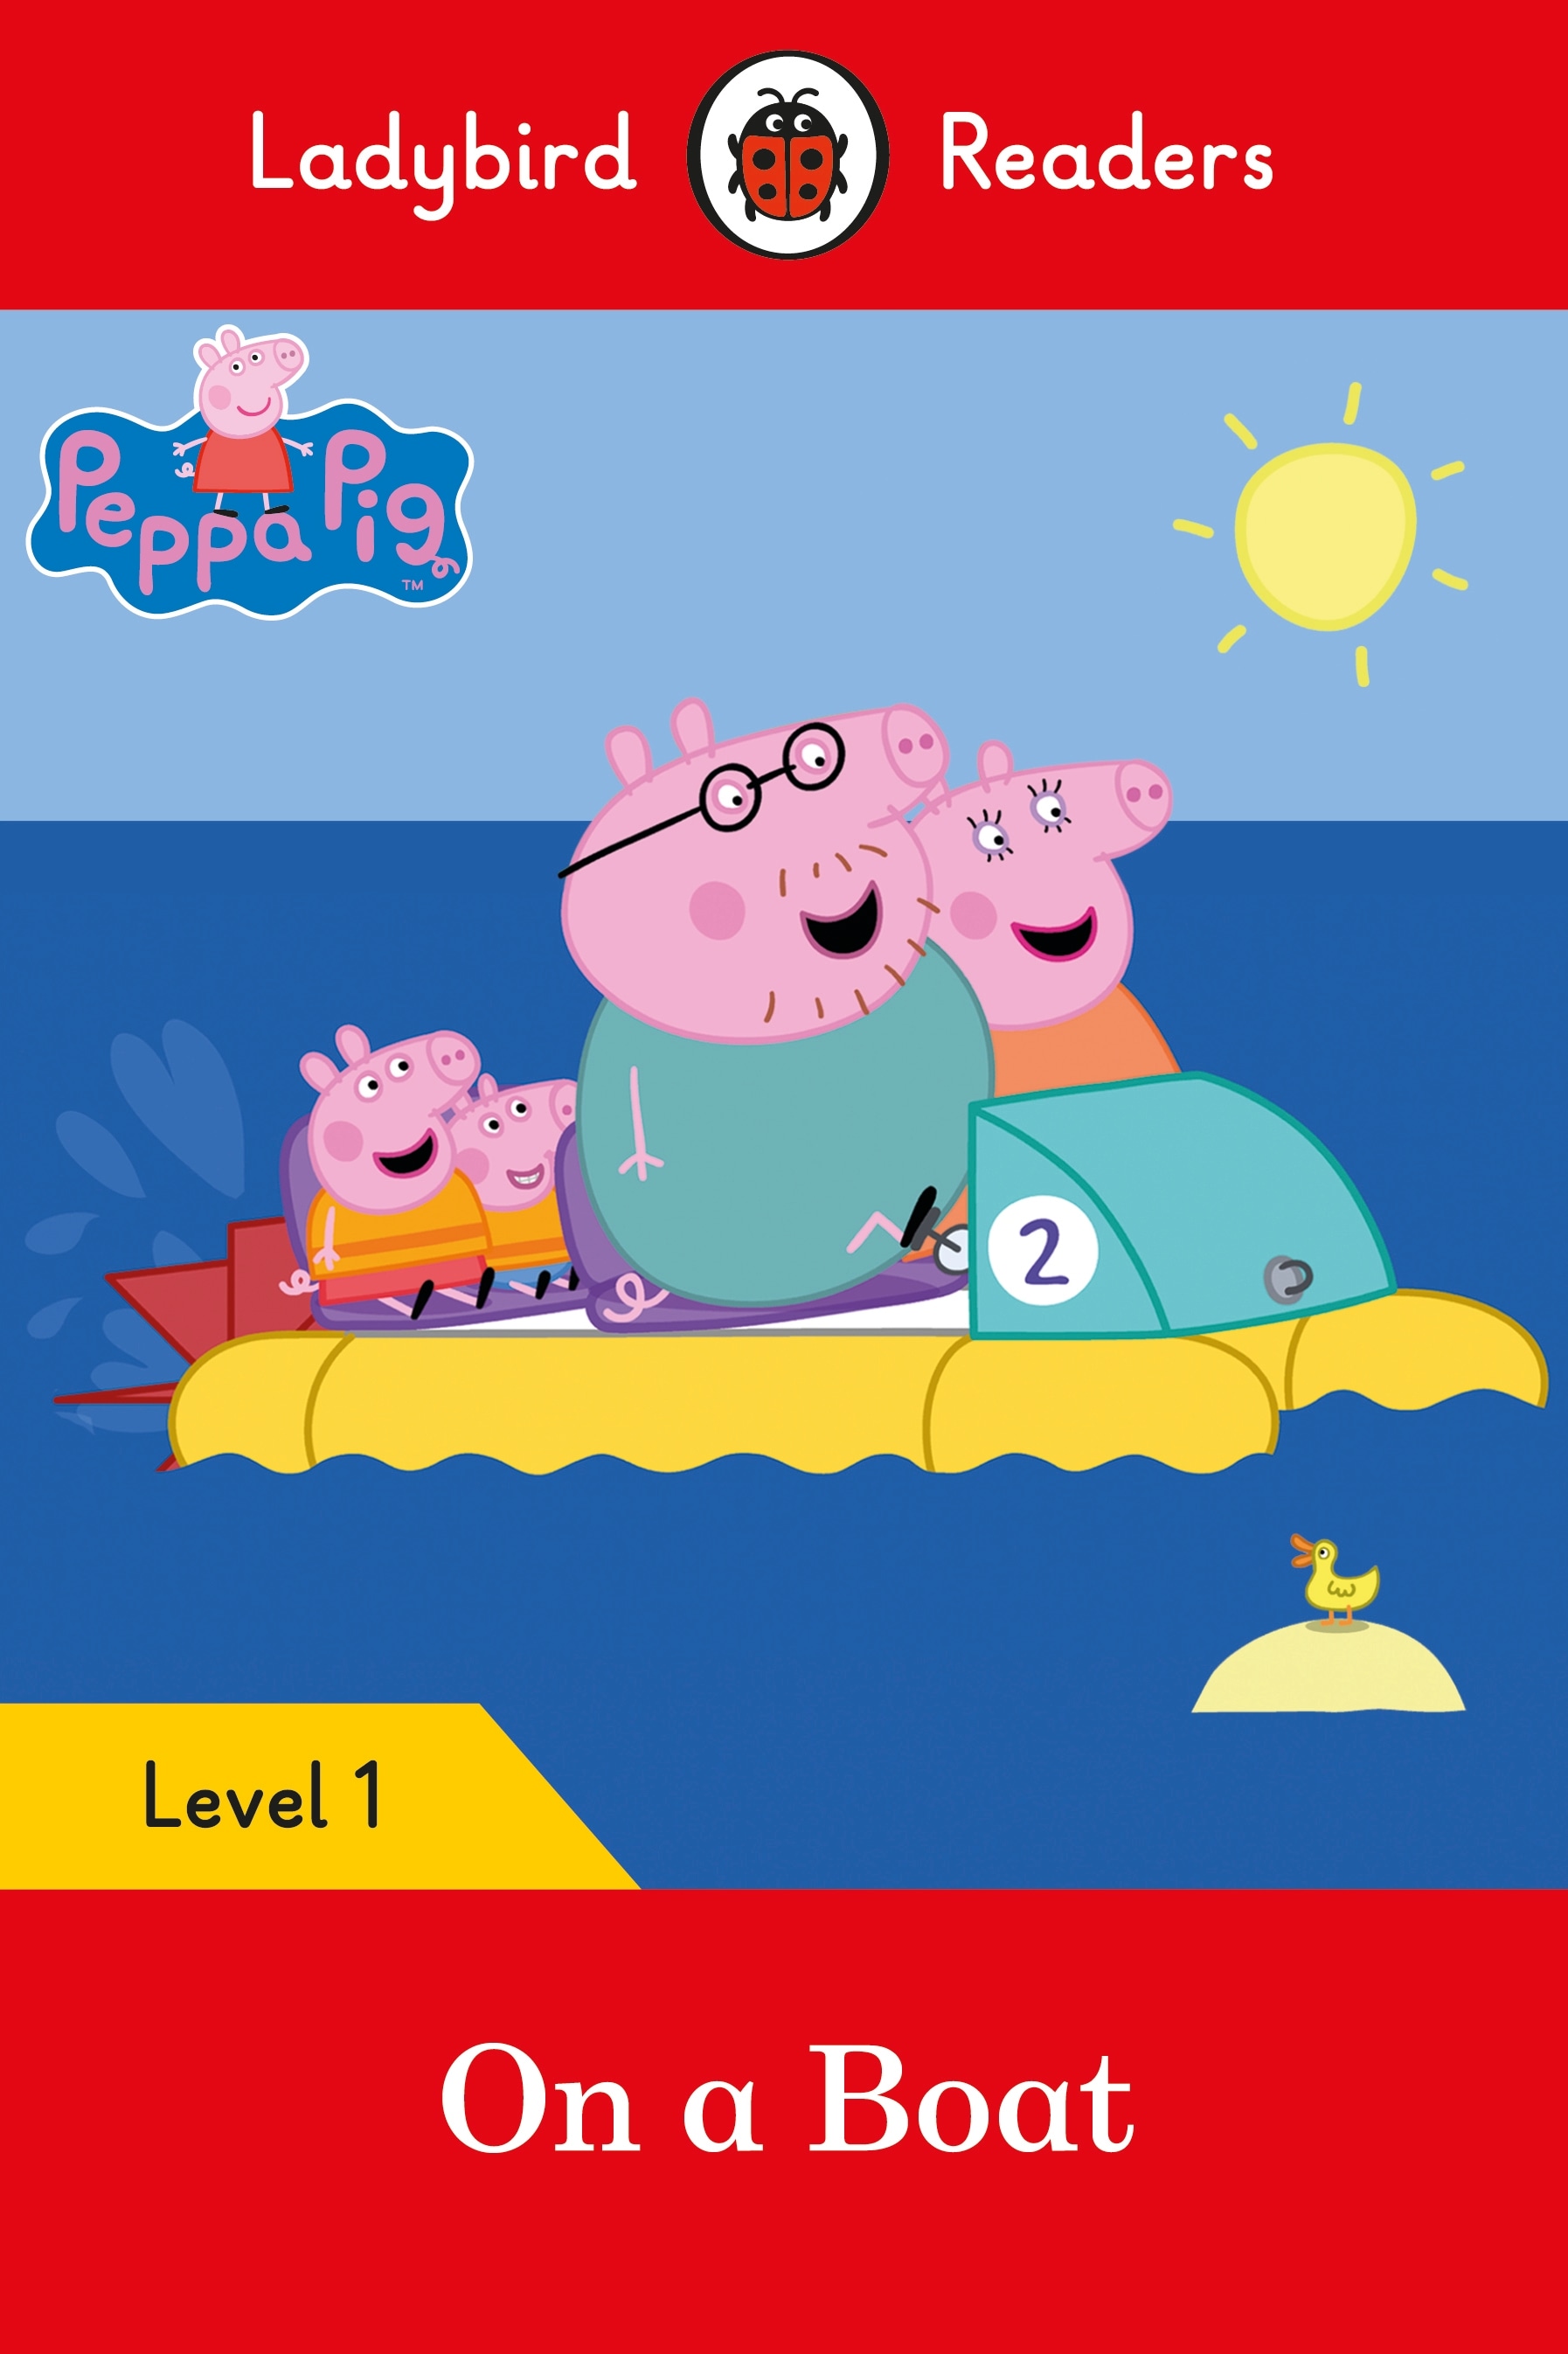 Book “Peppa Pig: On a Boat - Ladybird Readers Level 1” by Ladybird, Peppa Pig — July 6, 2017